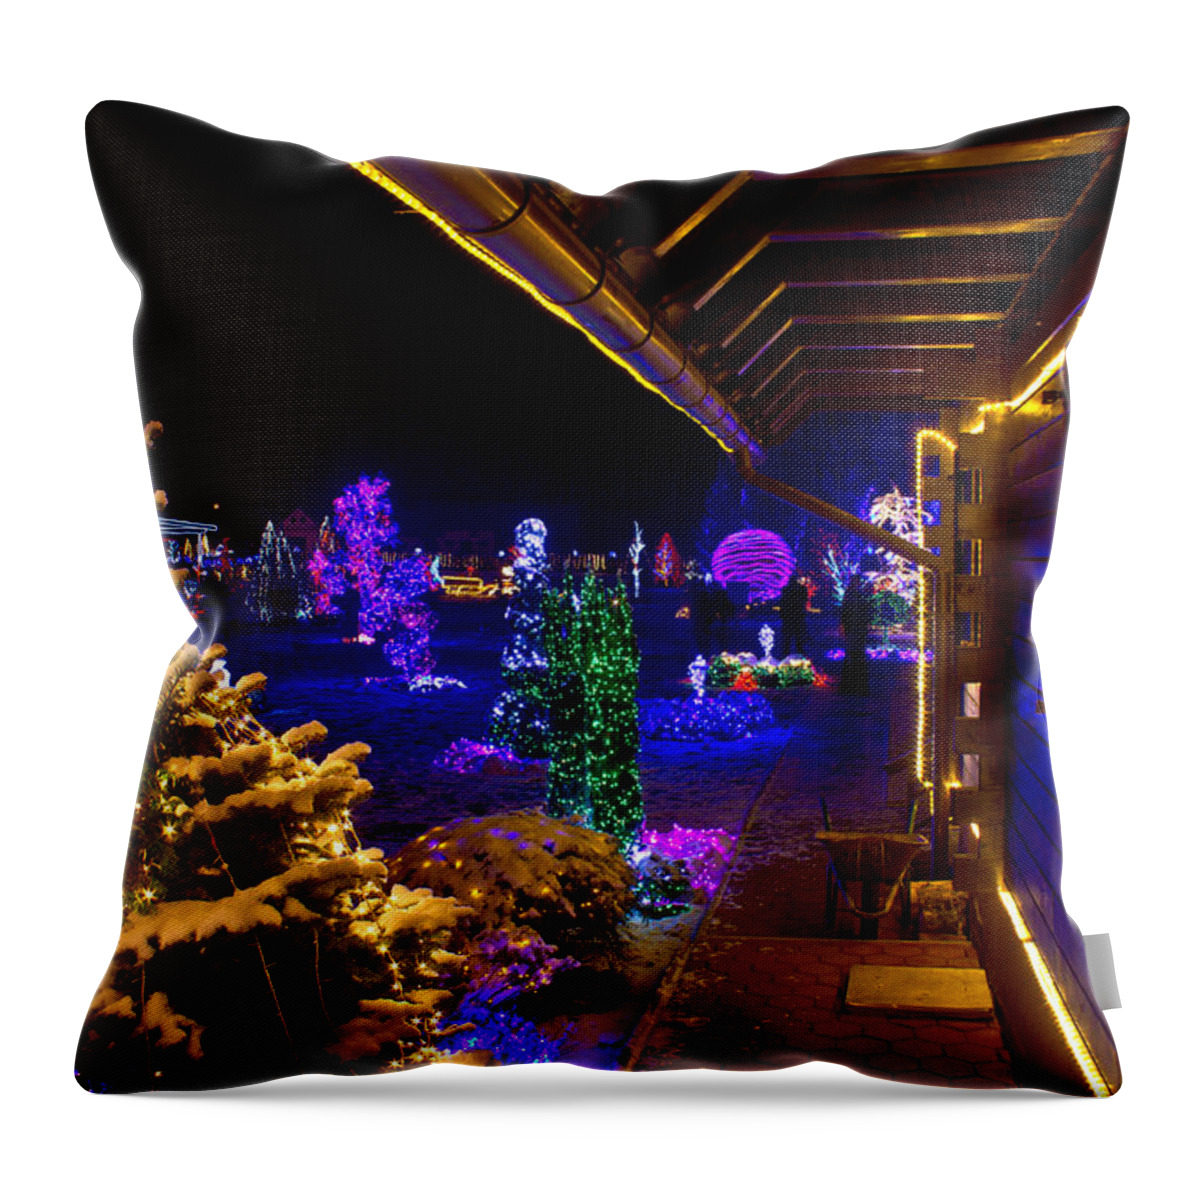 Christmas Throw Pillow featuring the mixed media Christmas fantasy trees and wooden house in lights by Brch Photography